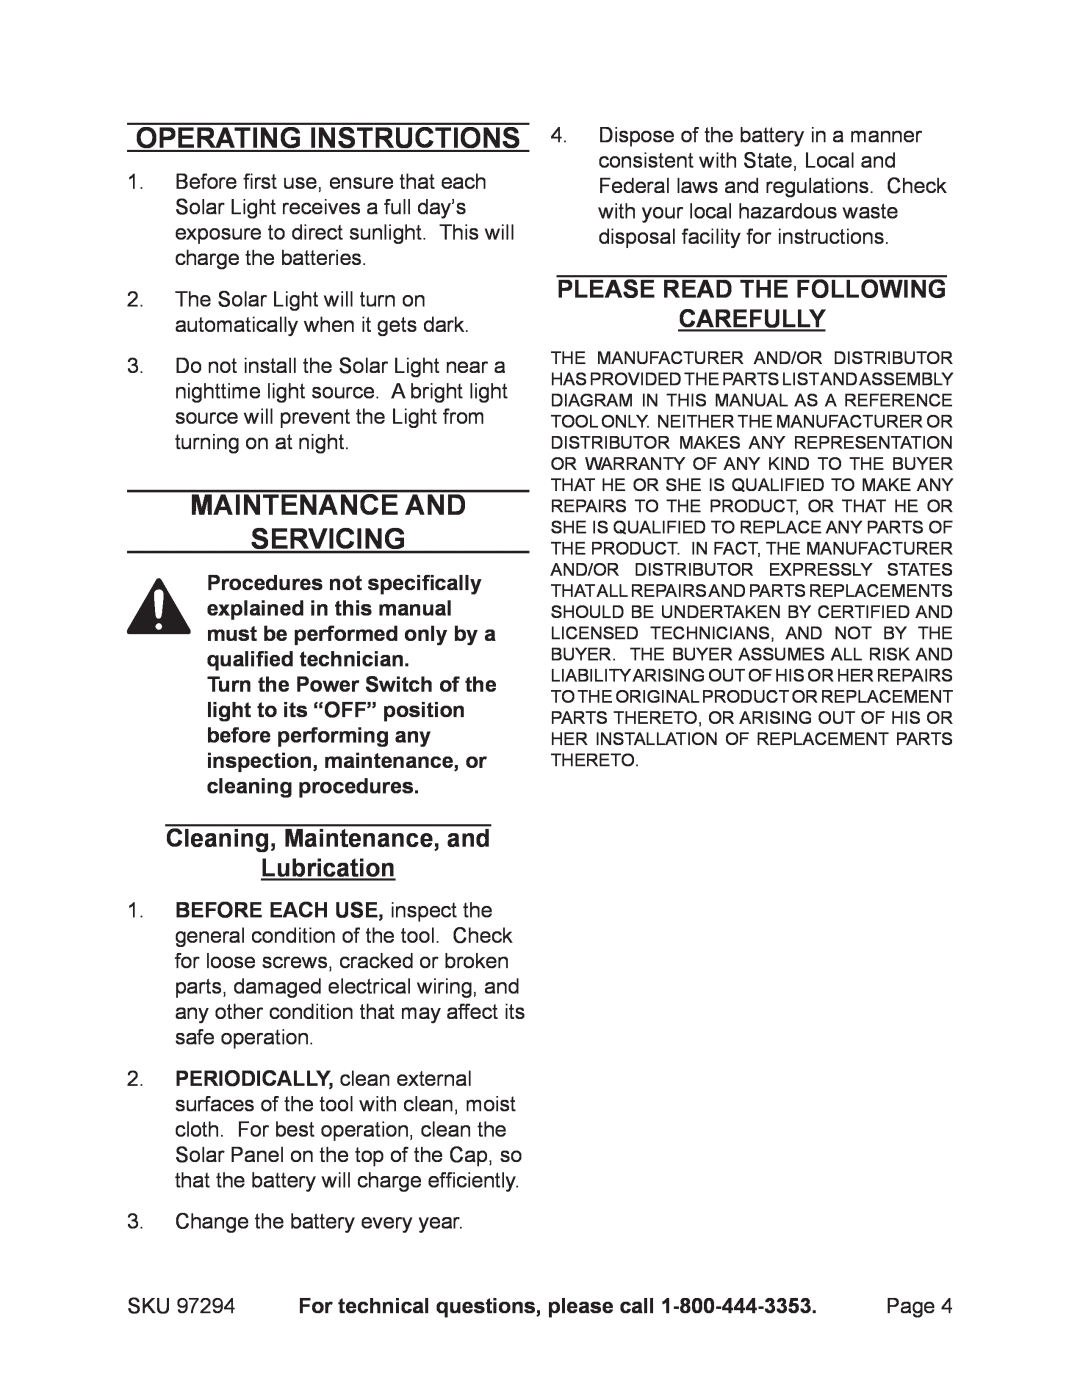 Harbor Freight Tools 97294 manual Operating Instructions, Maintenance And Servicing, Cleaning, Maintenance, and Lubrication 